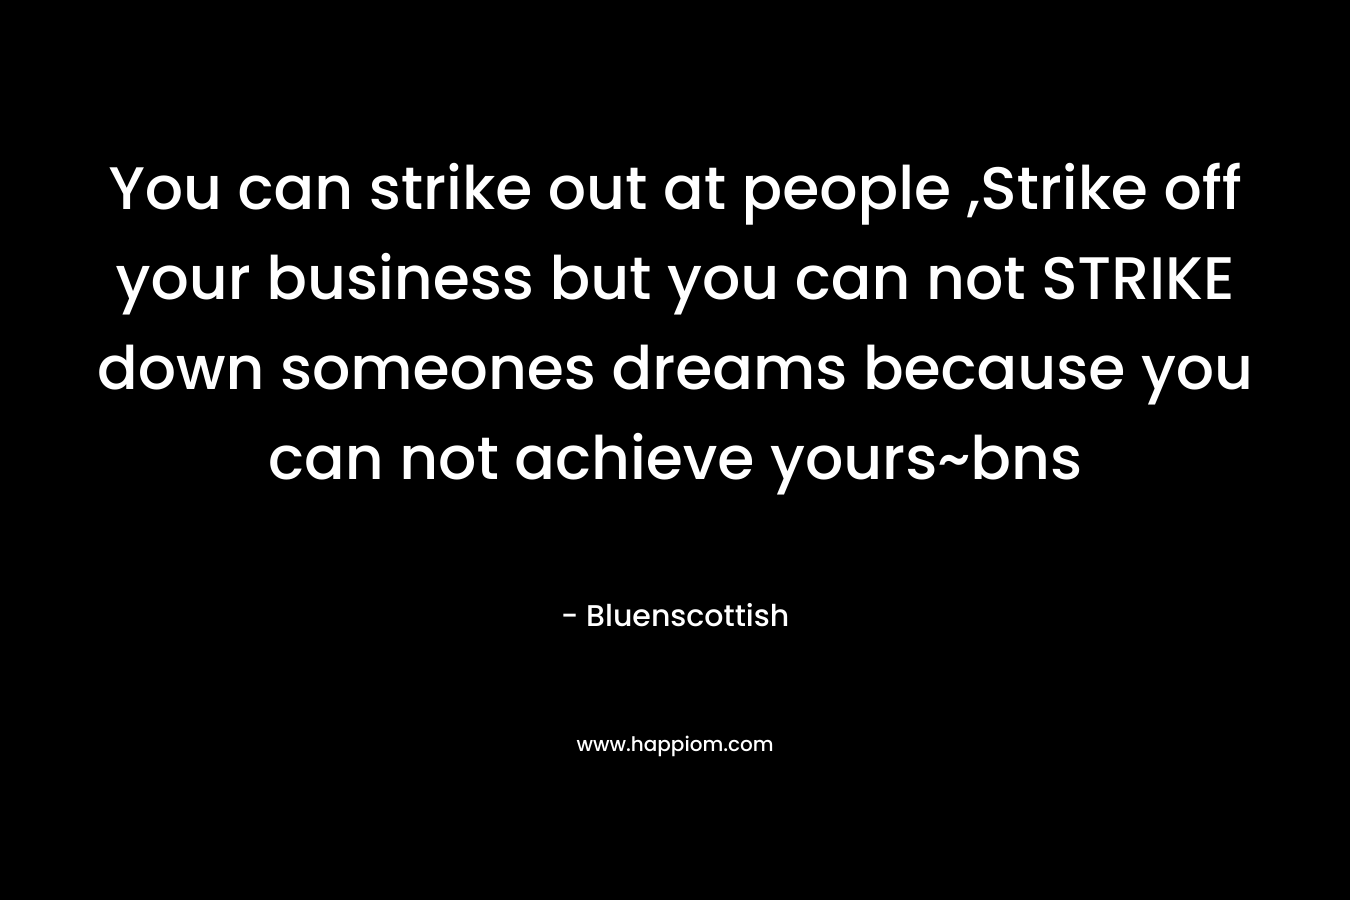 You can strike out at people ,Strike off your business but you can not STRIKE down someones dreams because you can not achieve yours~bns